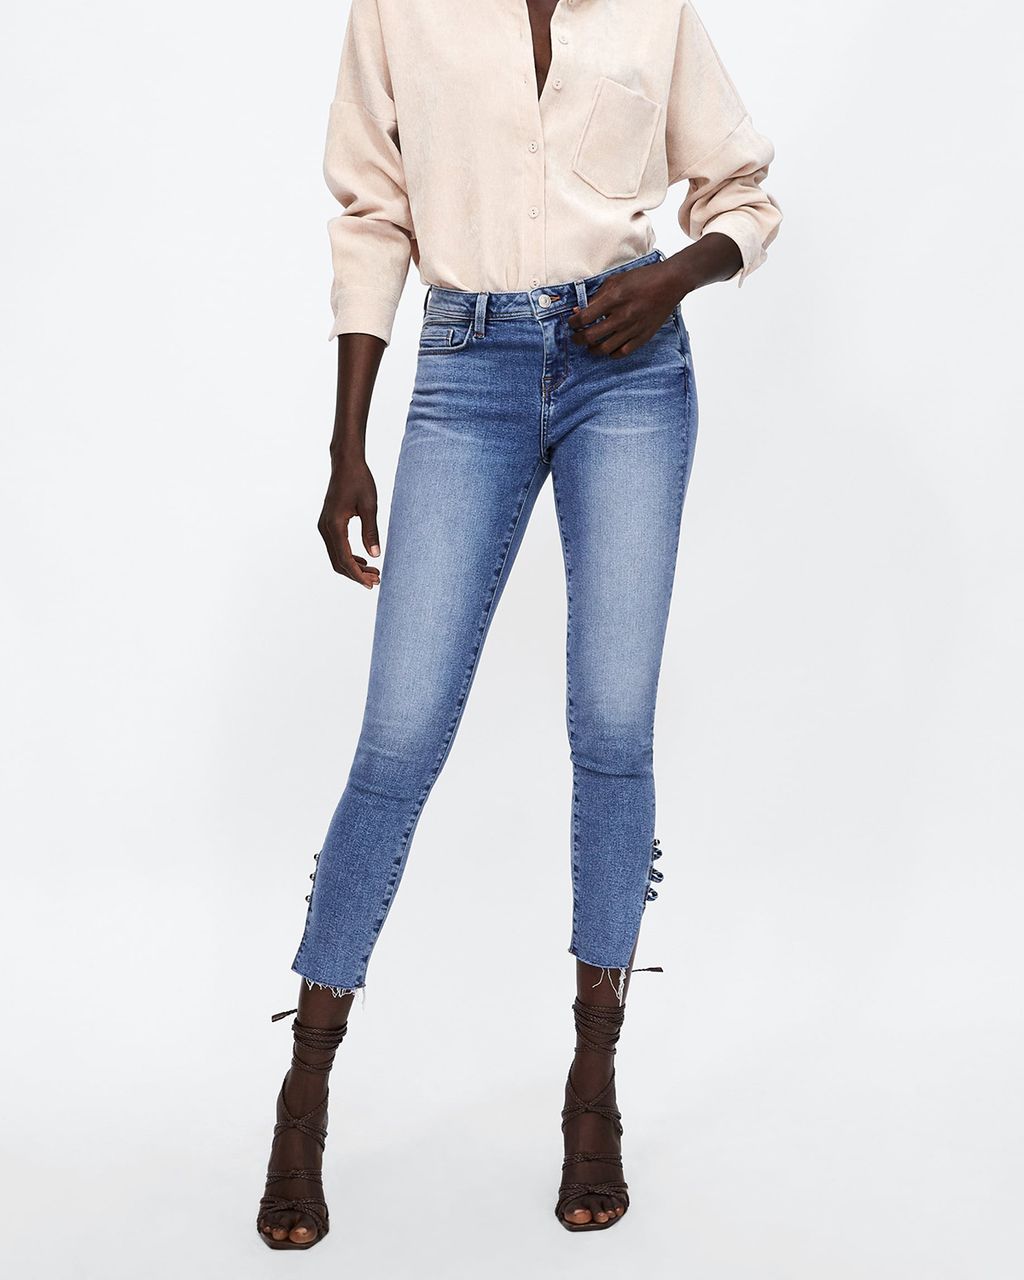 These New Jeans Solve the #1 Skinny-Jean Problem | Who What Wear